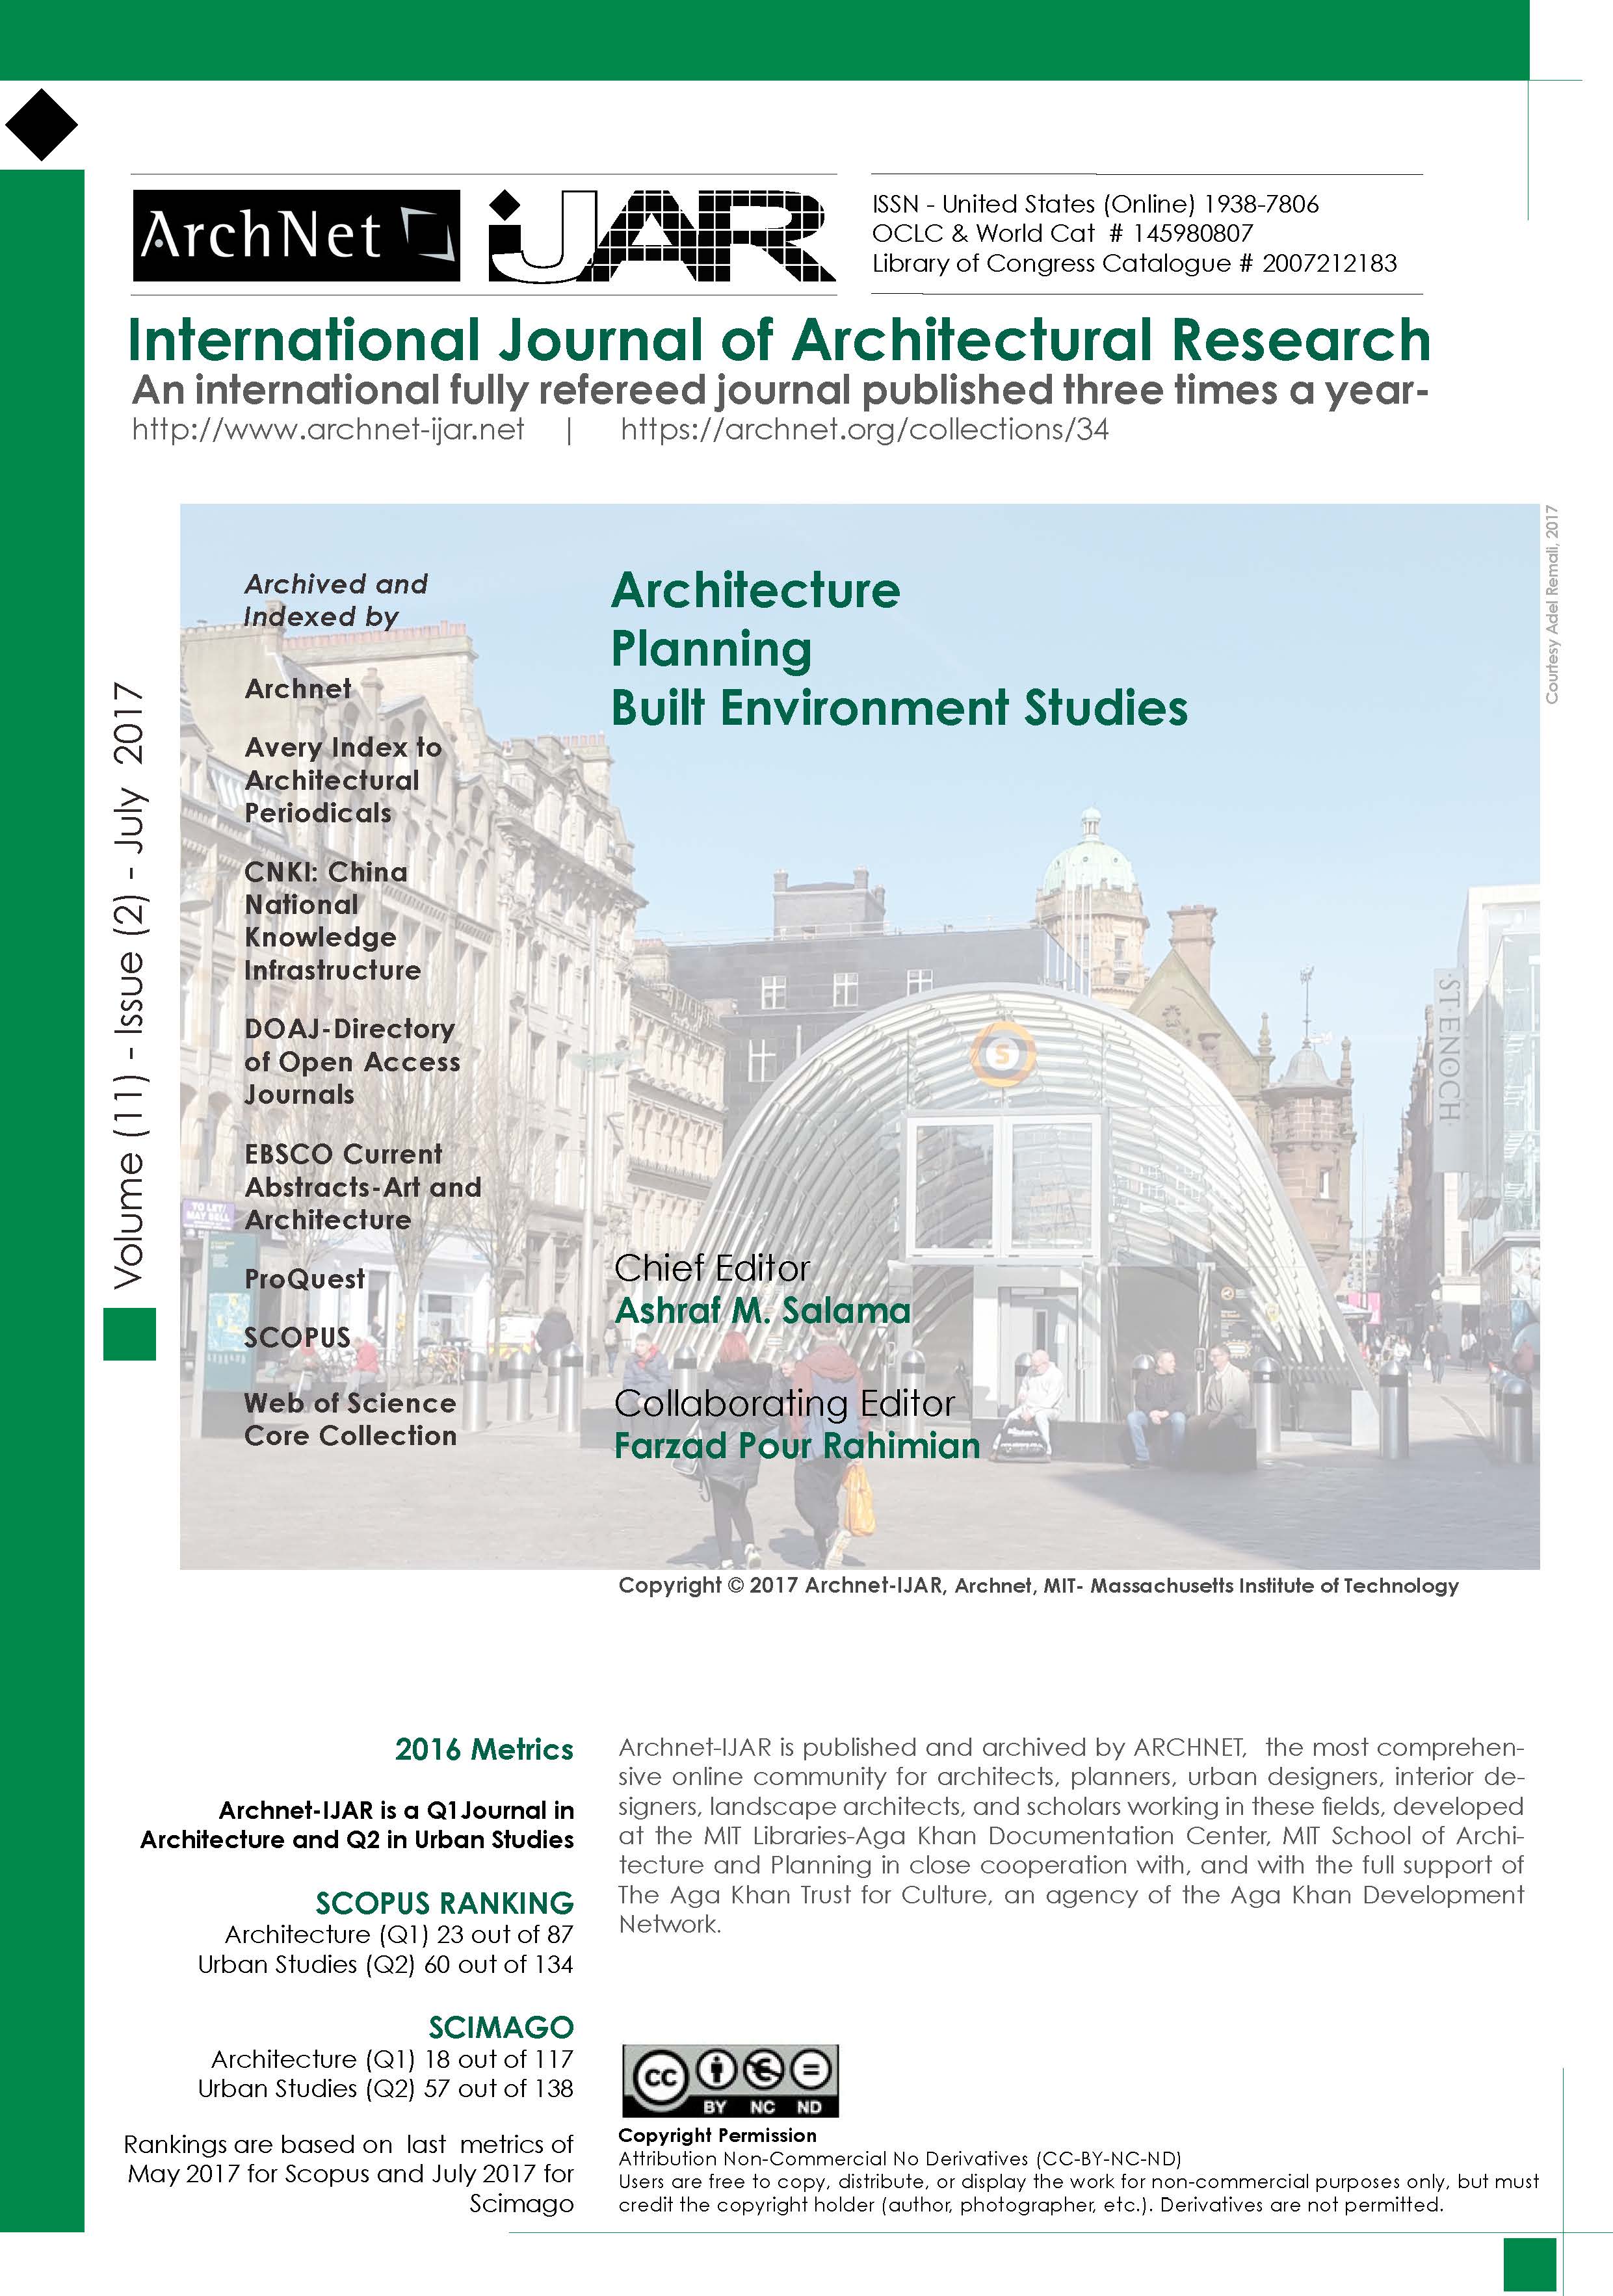 Farzad Pour Rahimian - <div style="text-align: justify;"><span style="color: rgb(1, 1, 1);">Archnet-IJAR International Journal of Architectural Research is an interdisciplinary, fully-refereed scholarly online journal of architecture, planning, and built environment studies. Two international boards (advisory and editorial) ensure the quality of scholarly papers and allow for a comprehensive academic review of contributions spanning a wide spectrum of issues, methods, theoretical approaches and architectural and development practices.</span><span class="apple-converted-space" style="color: rgb(1, 1, 1);">&nbsp;</span><br></div><div style="text-align: justify;"><span style="color: rgb(1, 1, 1);"><br></span></div><span style="color: rgb(1, 1, 1); background-image: initial; background-position: initial; background-size: initial; background-repeat: initial; background-attachment: initial; background-origin: initial; background-clip: initial;"><div style="text-align: justify;">ArchNet-IJAR provides a comprehensive academic review of a wide spectrum of issues, methods, and theoretical approaches. It aims to bridge theory and practice in the fields of architectural/design research and urban planning/built environment studies, reporting on the latest research findings and innovative approaches for creating responsive environments.</div><div style="text-align: justify;"><span style="color: rgb(0, 0, 0);"><br></span></div><div style="text-align: justify;"><span style="color: rgb(0, 0, 0);">Demonstrating the essence of the journal as a truly international platform that covers issues of interest and concern to the global academic and professional community, this issue of Archnet-IJAR, volume 11, issue # 2, July 2017 includes various topics that manifest plurality and diversity as inherent qualities of architectural and urban research published in the journal.&nbsp; Topics include architectural education and design studio teaching, urban and rural slums, heritage and historic environments in various contexts, participatory planning and the charrette process, assessment of public spaces and plazas, and human perception of the built environment. These topics are debated and analytically discussed within cities, settlements, and urban environments in Bahrain, Bangladesh, California-USA, Libya, Scotland, and Spain. The issue also includes three papers selected from the Fifth Architectural Jordanian International Conference – 1-3 November 2016, which uniquely speak to the context of Jordan and the wider Middle East. The edition ends with a book review that highlights emerging issues related to border landscapes and social ecologies.</span></div></span>